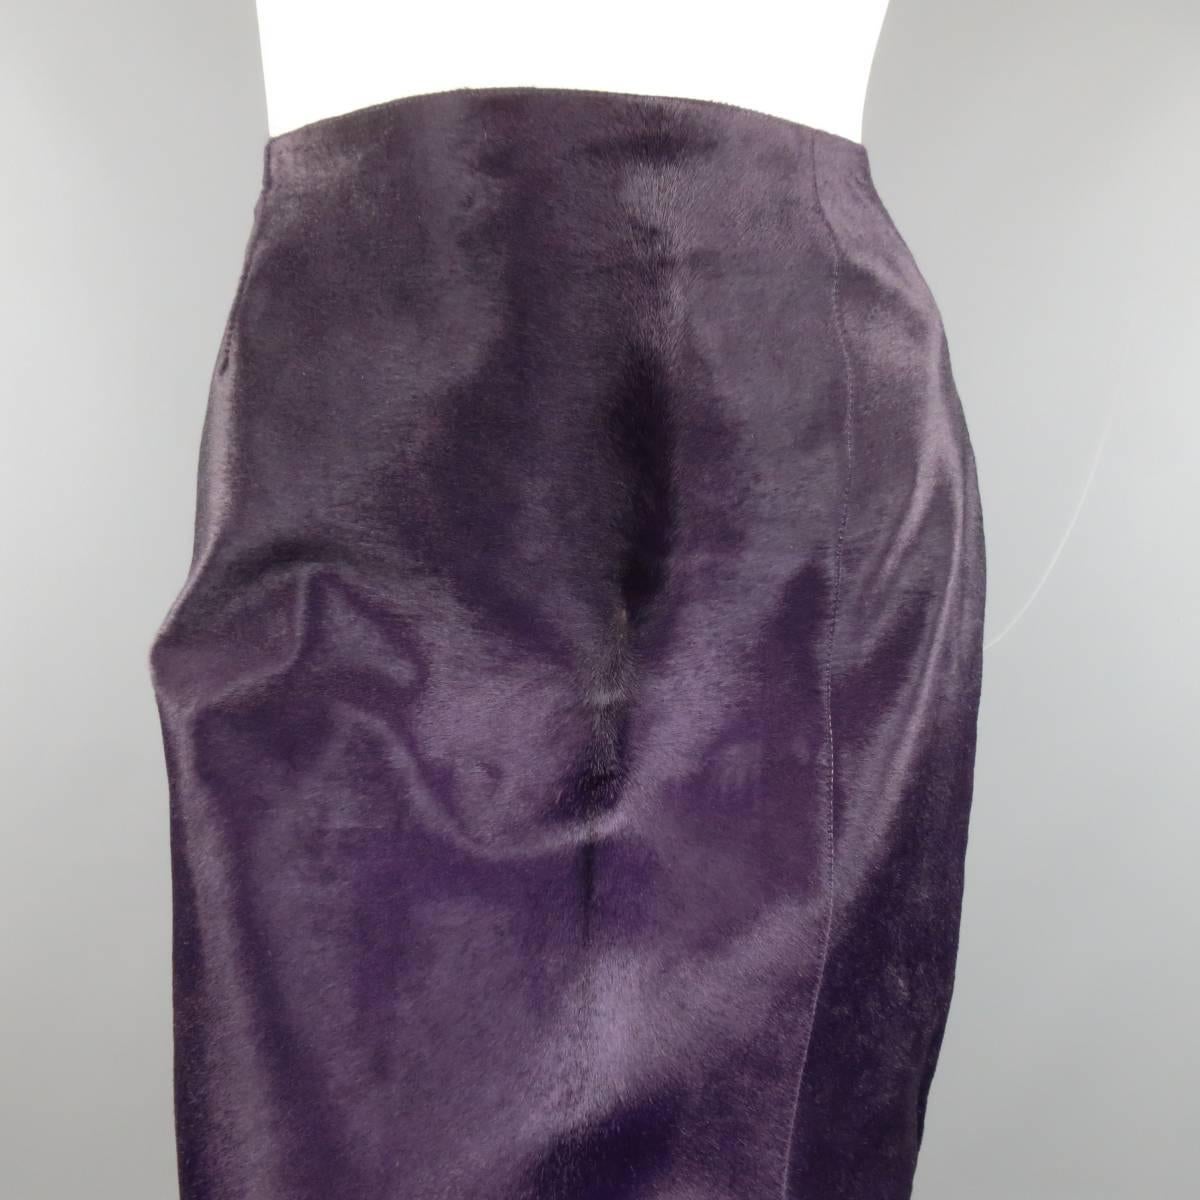 PAUL KA calf-hair pencil skirt with cupro lining features a zip closure and small slit above left knee in a rich eggplant purple. Made in France.
 
Excellent Pre-Owned Condition.
Marked: 40
 
Measurements :
 
Waste: 30 In.
Hip: 36 In.
Length: 22 In.